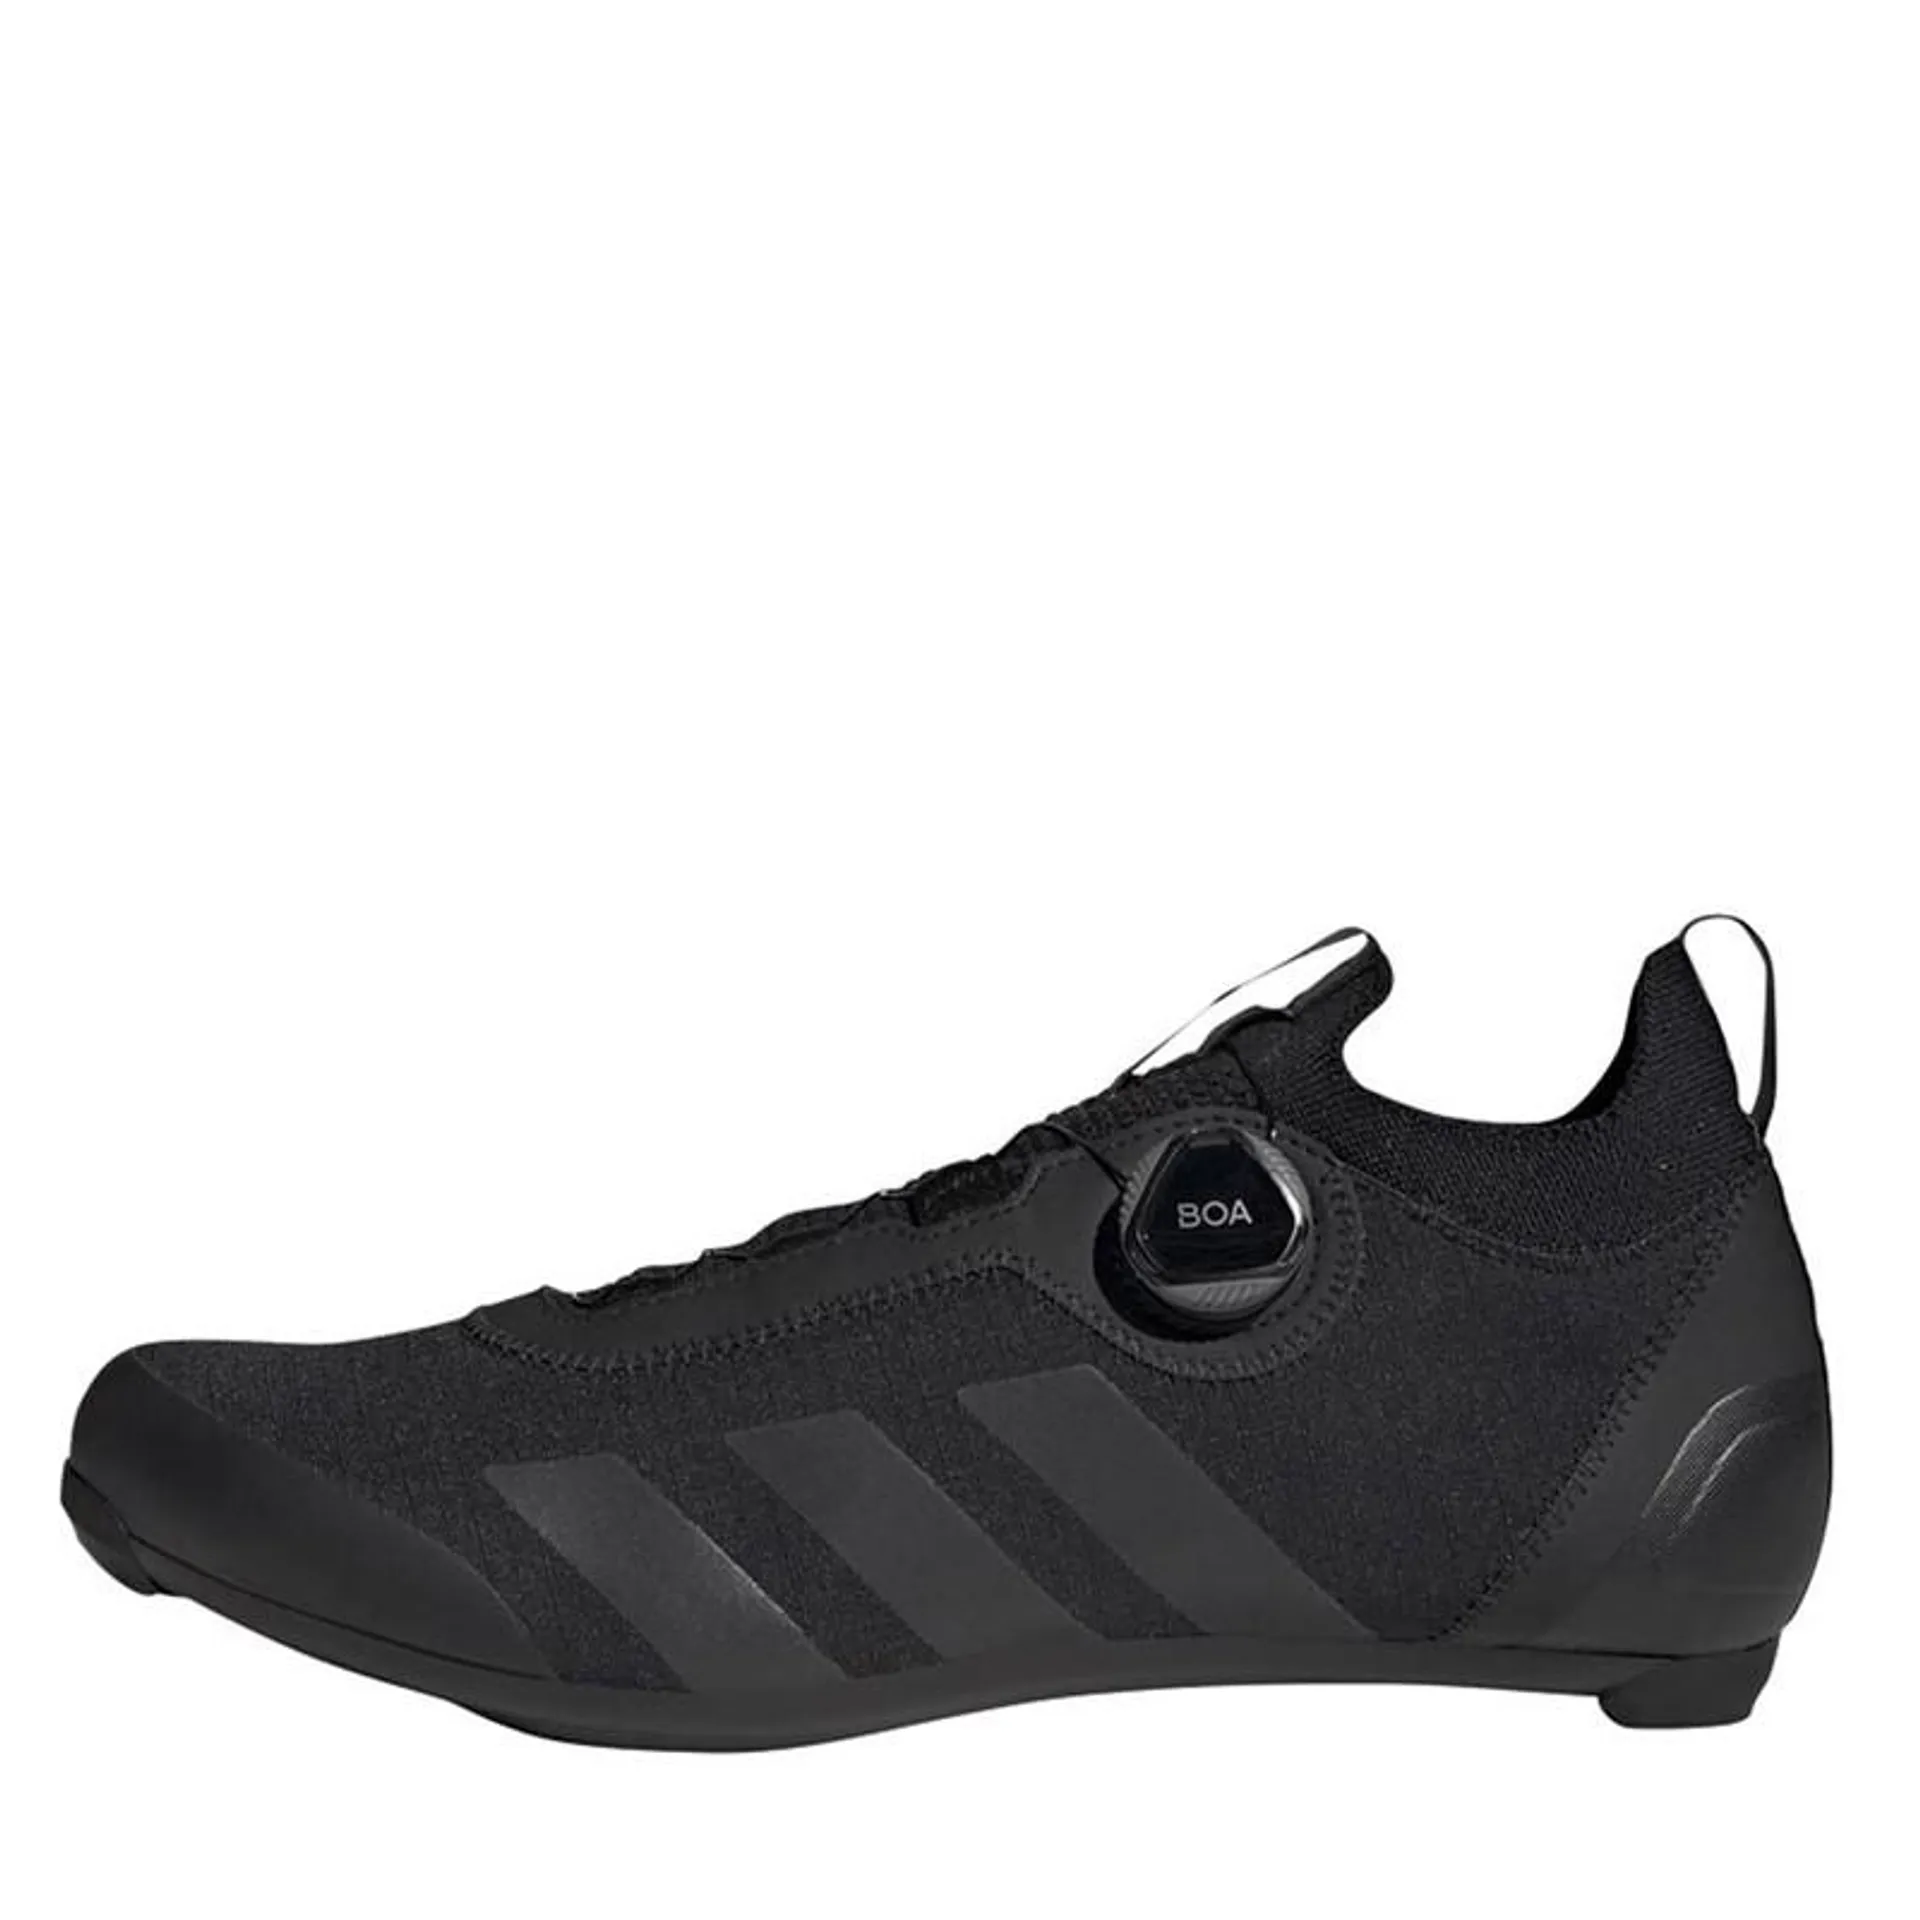 adidas Mens The Parley Boa Road Cycling Shoes Core Black/Carbon/Core Black